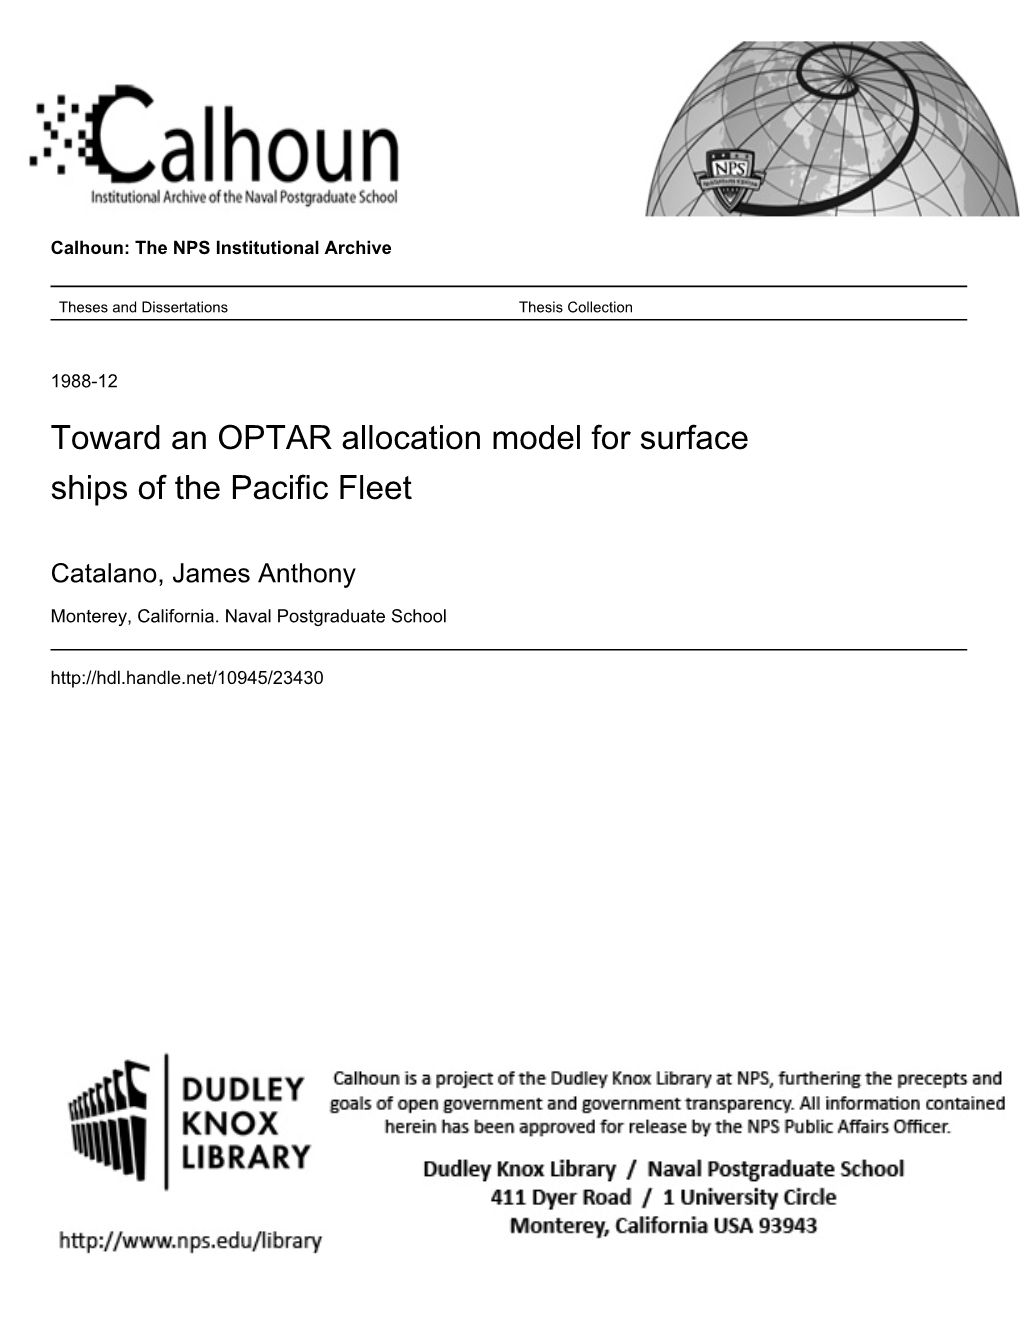 Toward an OPTAR Allocation Model for Surface Ships of the Pacific Fleet